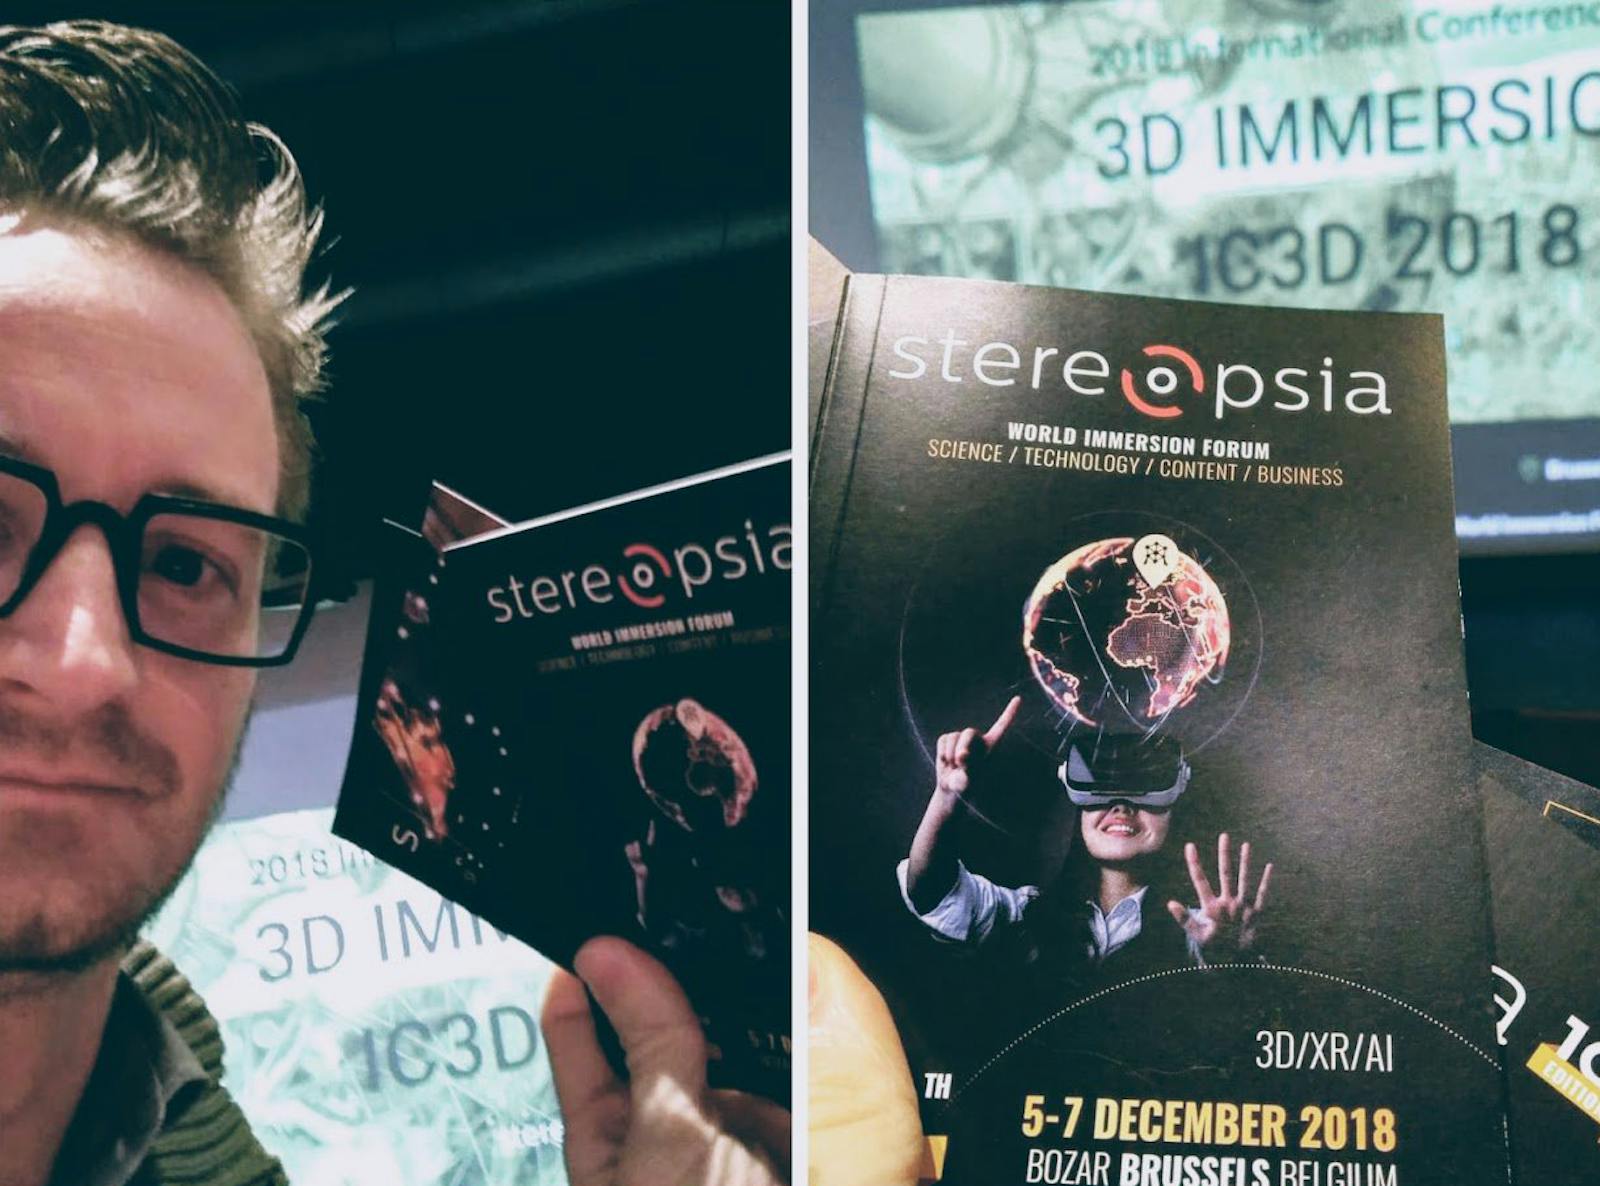 Sharing VR experiences at Stereopsia World Immersion Forum